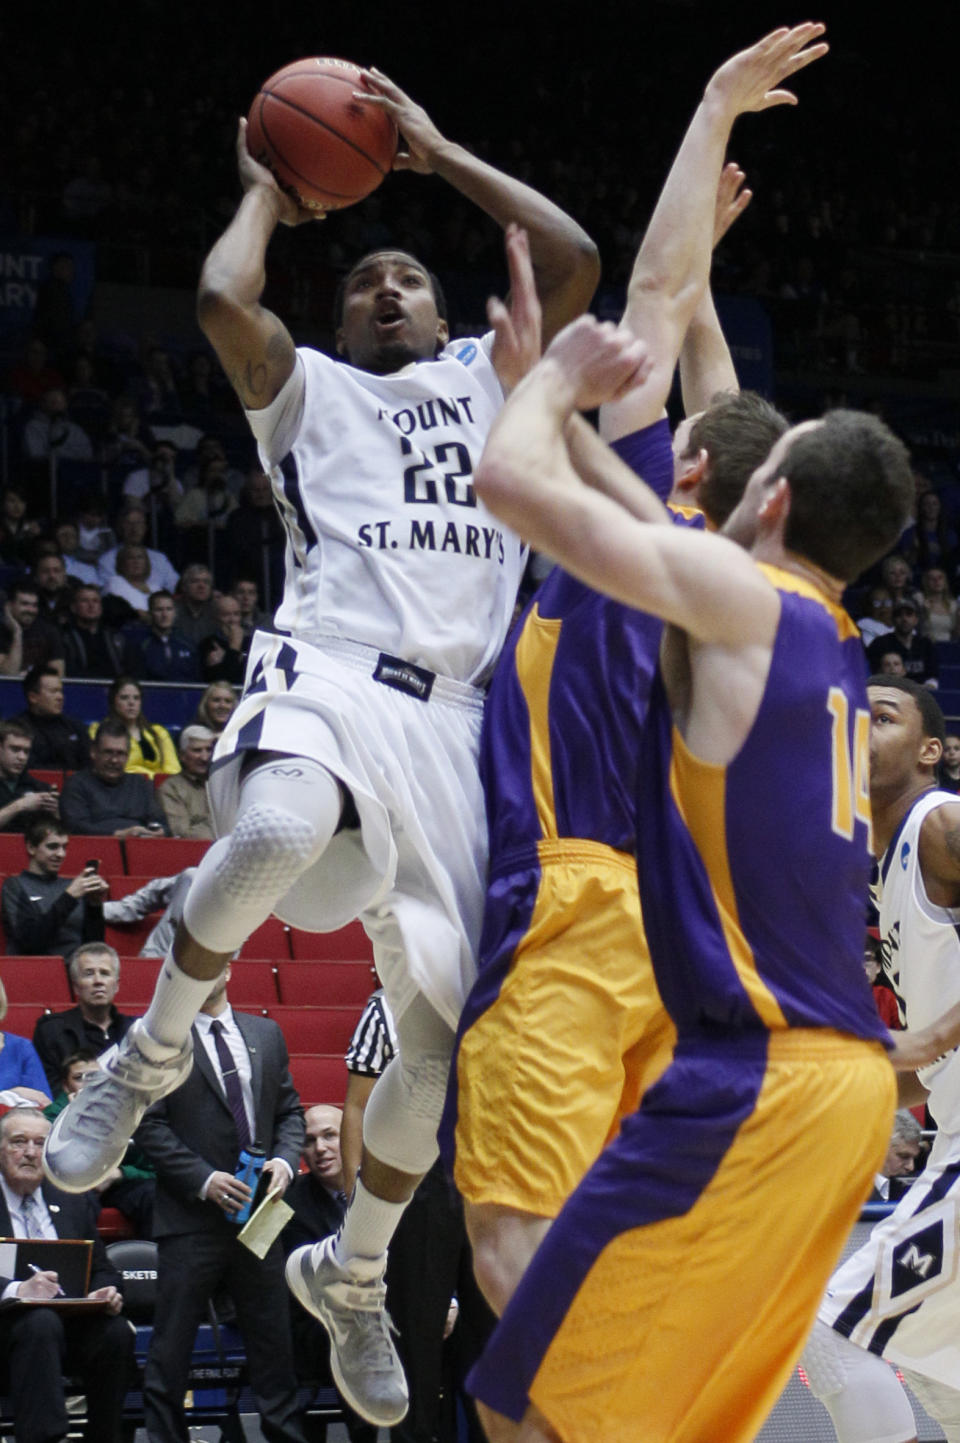 Mount St. Mary's guard Rashad Whack (22) drives against Albany in the first half of a first-round game of the NCAA college basketball tournament, Tuesday, March 18, 2014, in Dayton, Ohio. (AP Photo/Skip Peterson)